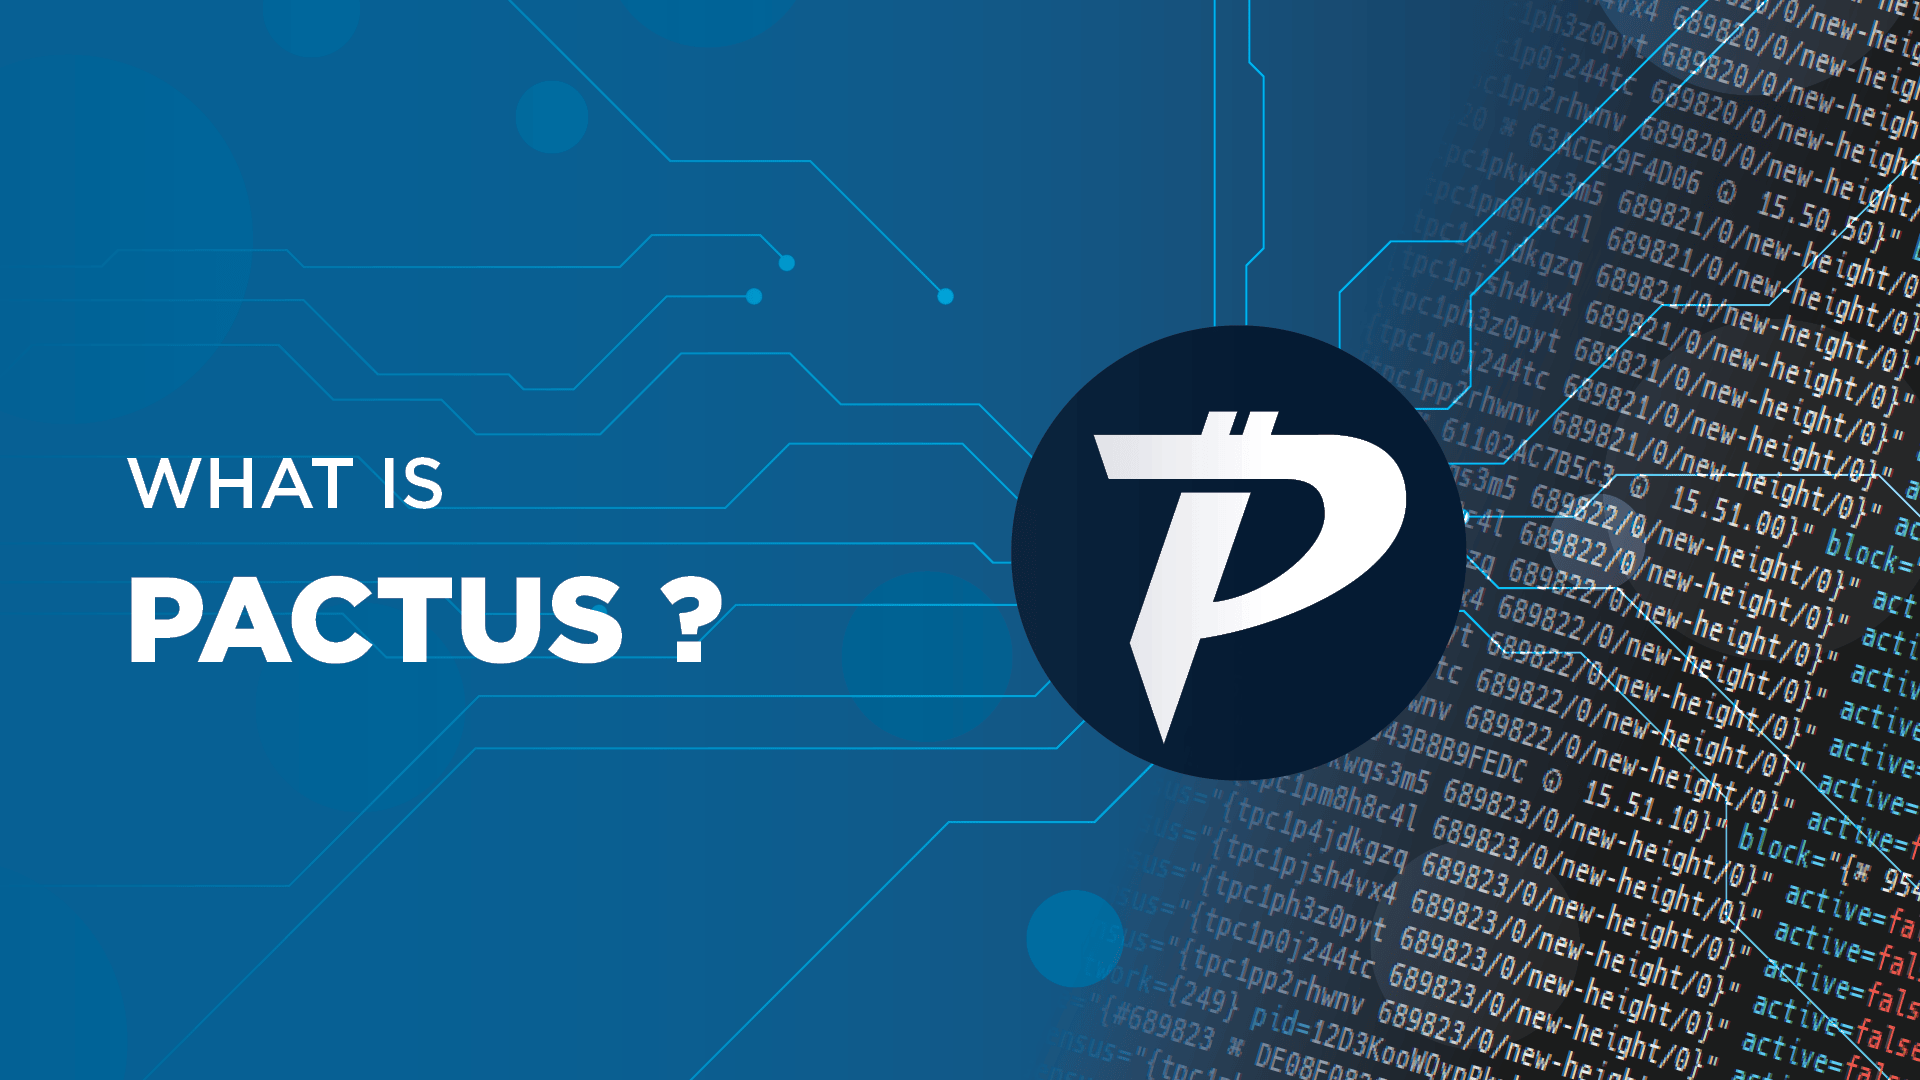 Pactus - a real Proof-of-Stake blockchain